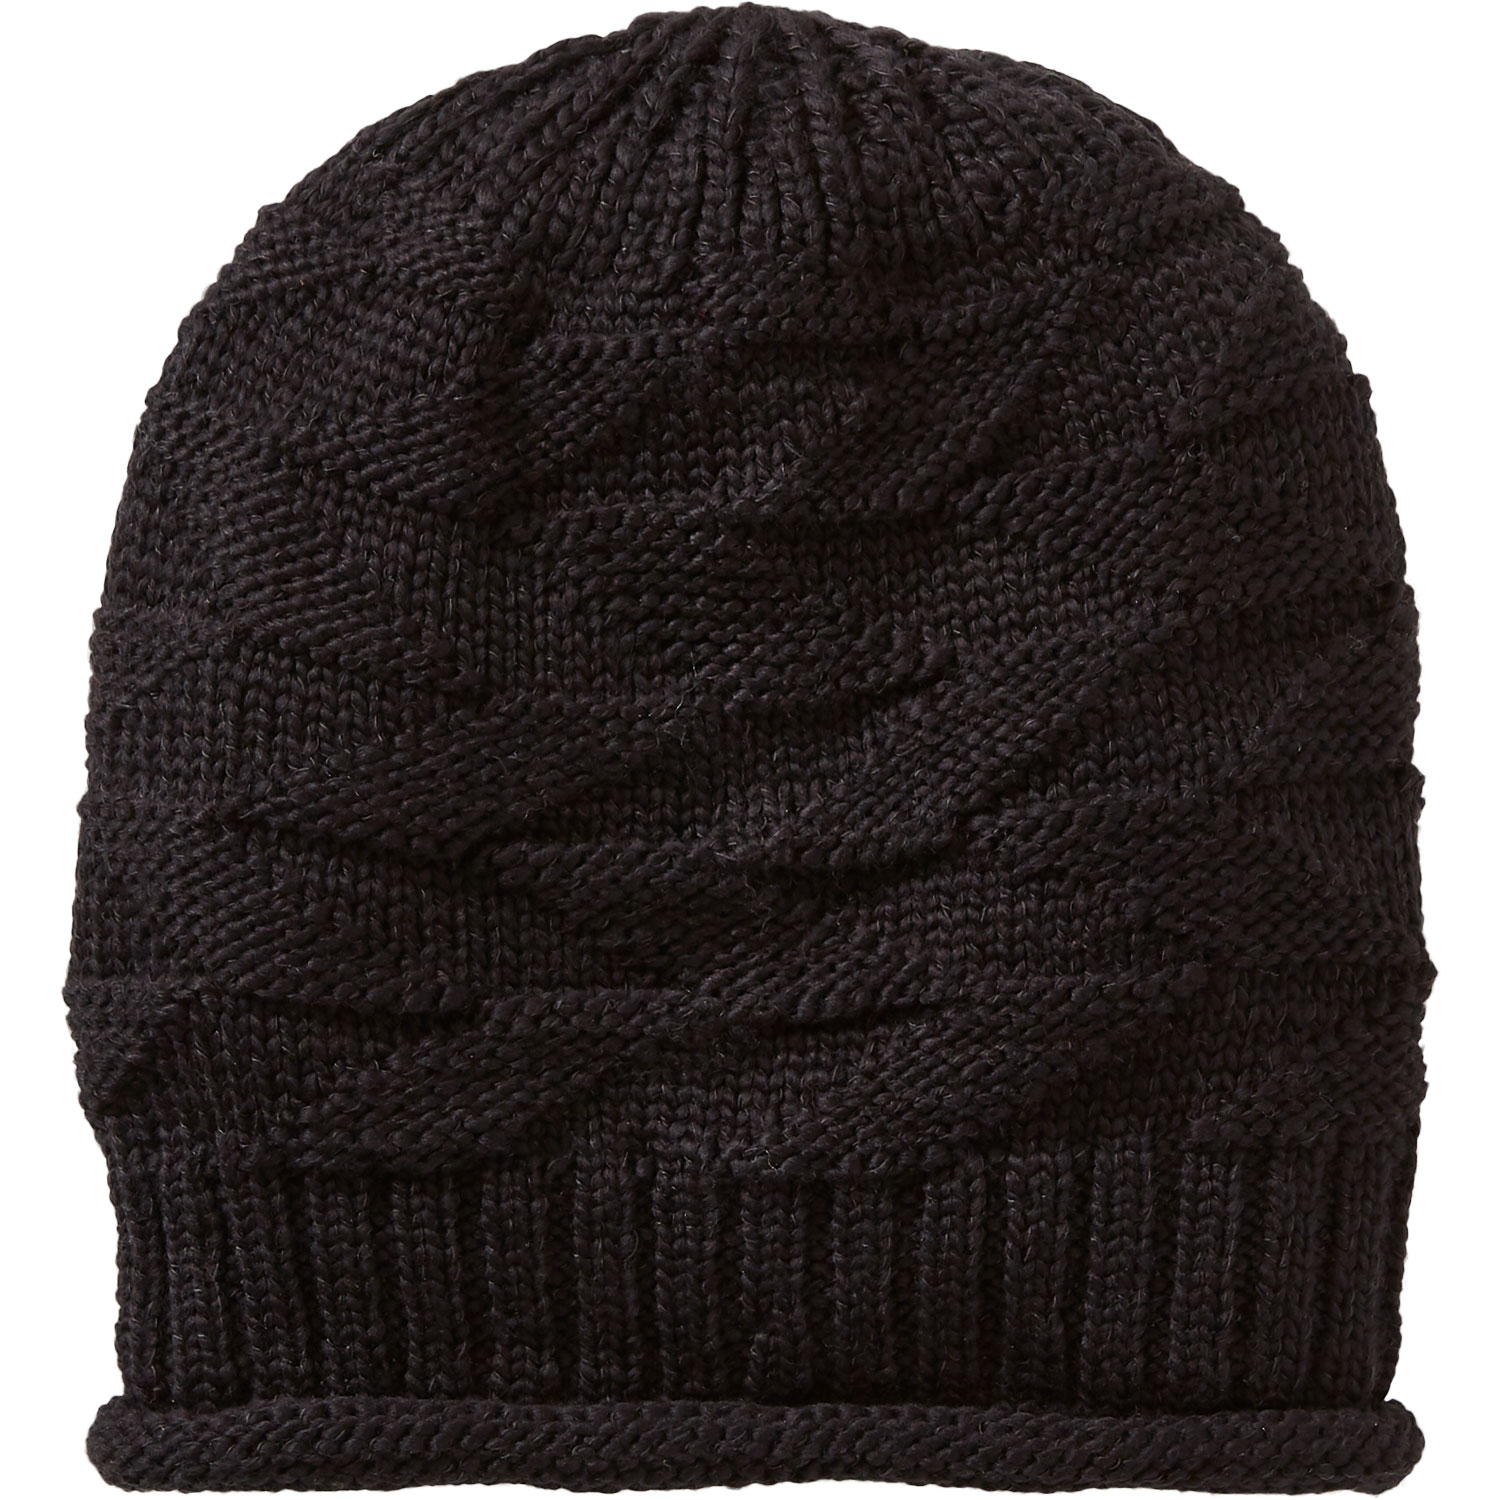 Women's Slouchy Knit Beanie | Duluth Trading Company